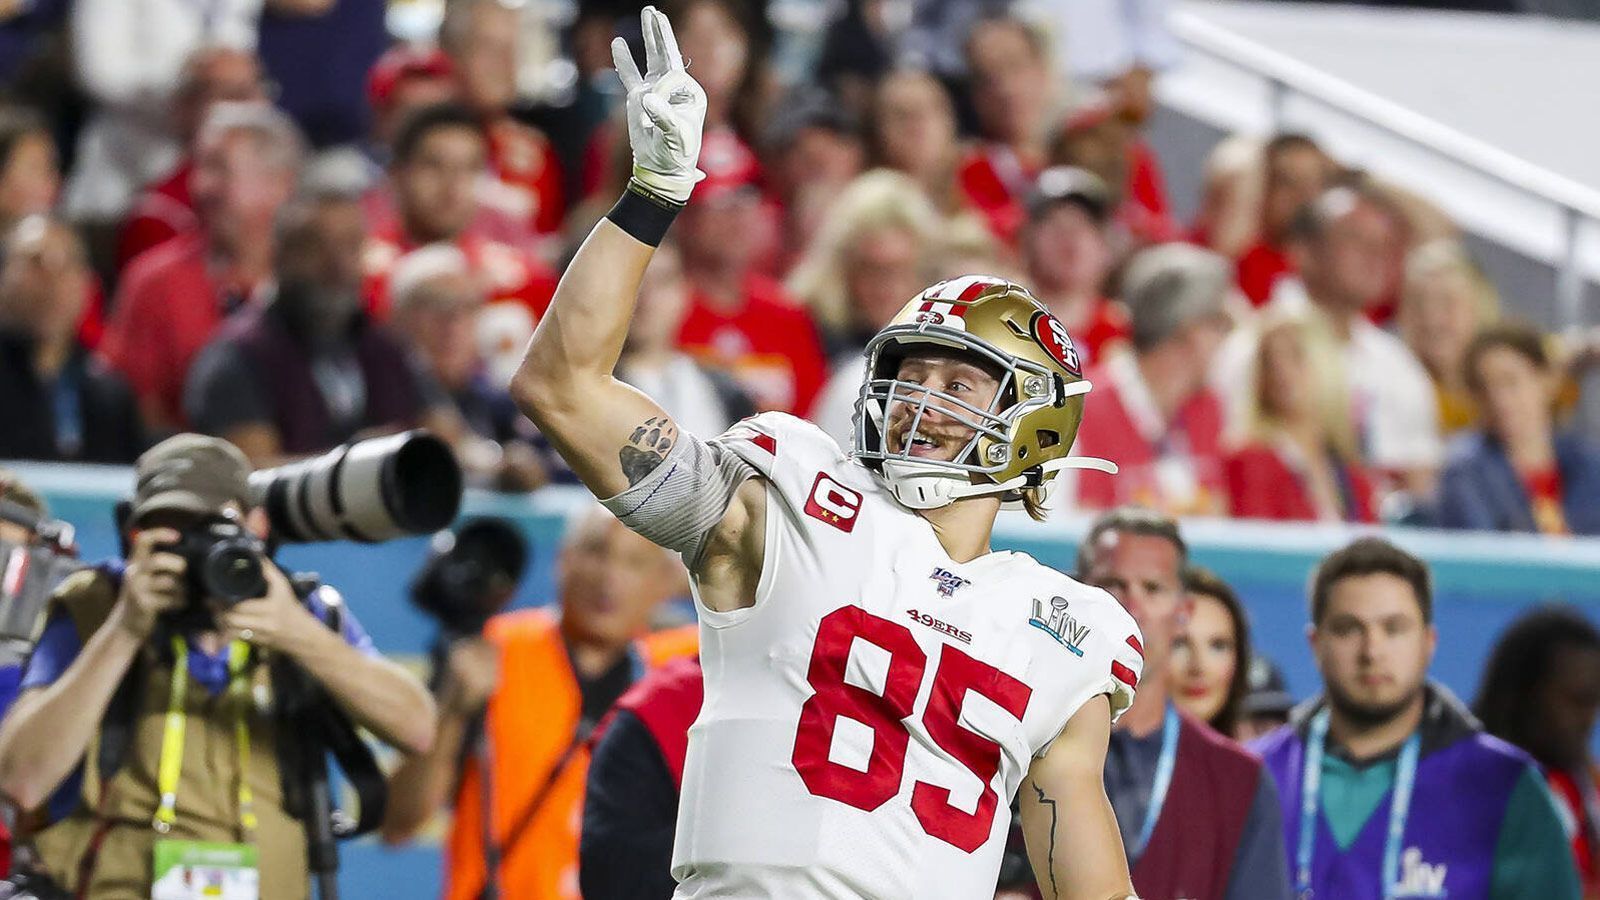 
                <strong>San Francisco 49ers</strong><br>
                Overall Ratings:George Kittle – 98 -Trent Williams – 93 -Fred Warner – 91 -Richard Sherman – 91 -Nick Bosa – 90 -Kyle Juszczyik - 87 -Arik Armstead – 86 -Kyle Juszczyk – 86 -Raheem Mostert - 86 -Dee Ford – 85
              